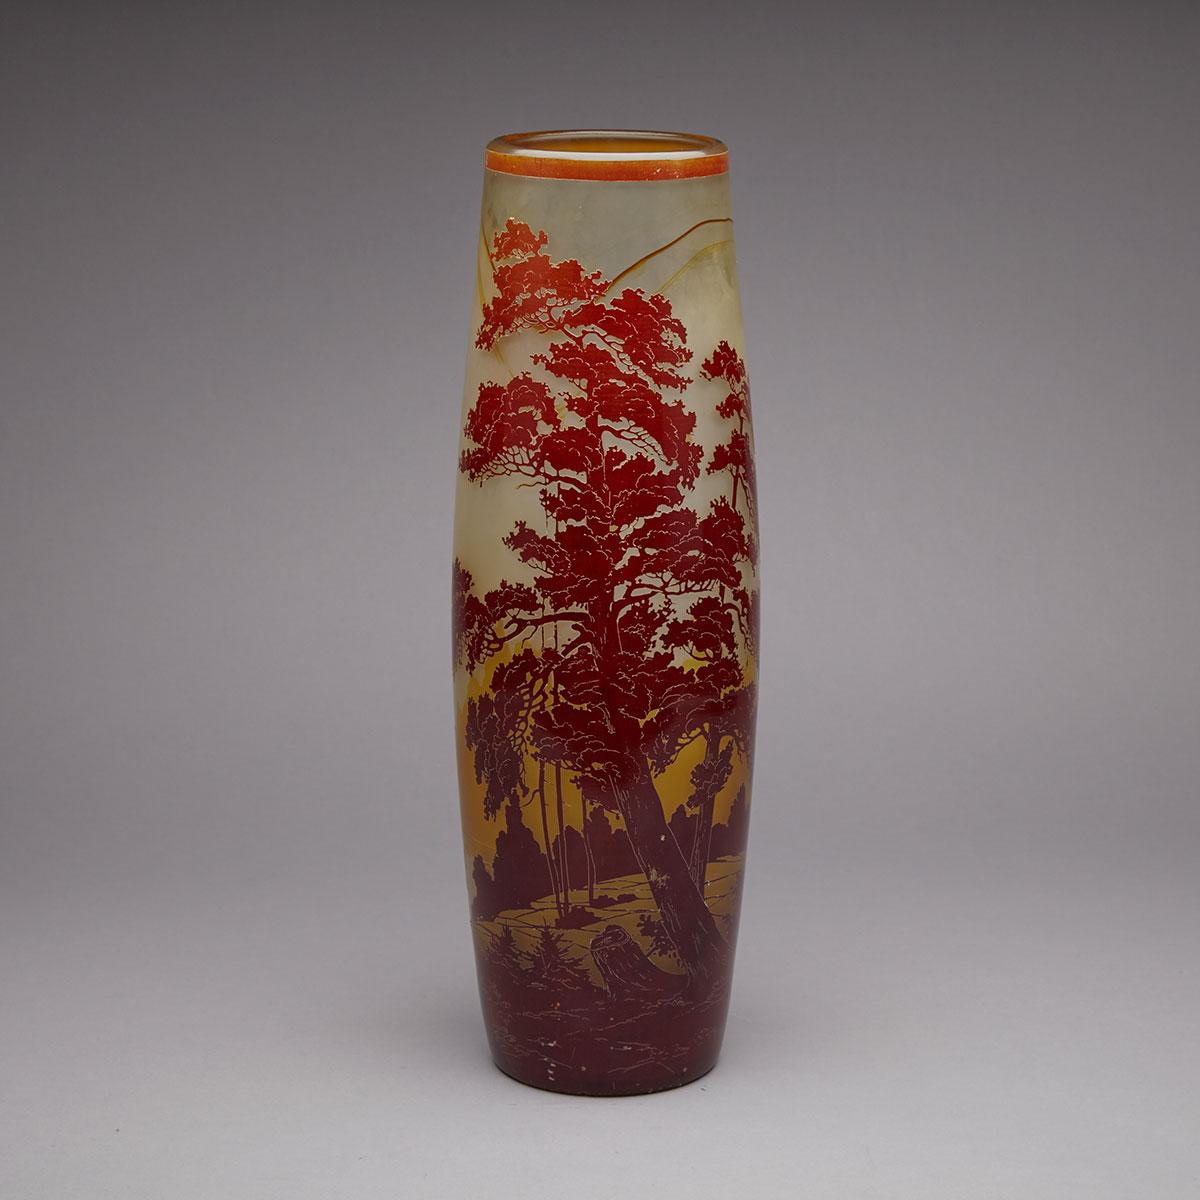 Cameo Glass Vase, probably French, early 20th century